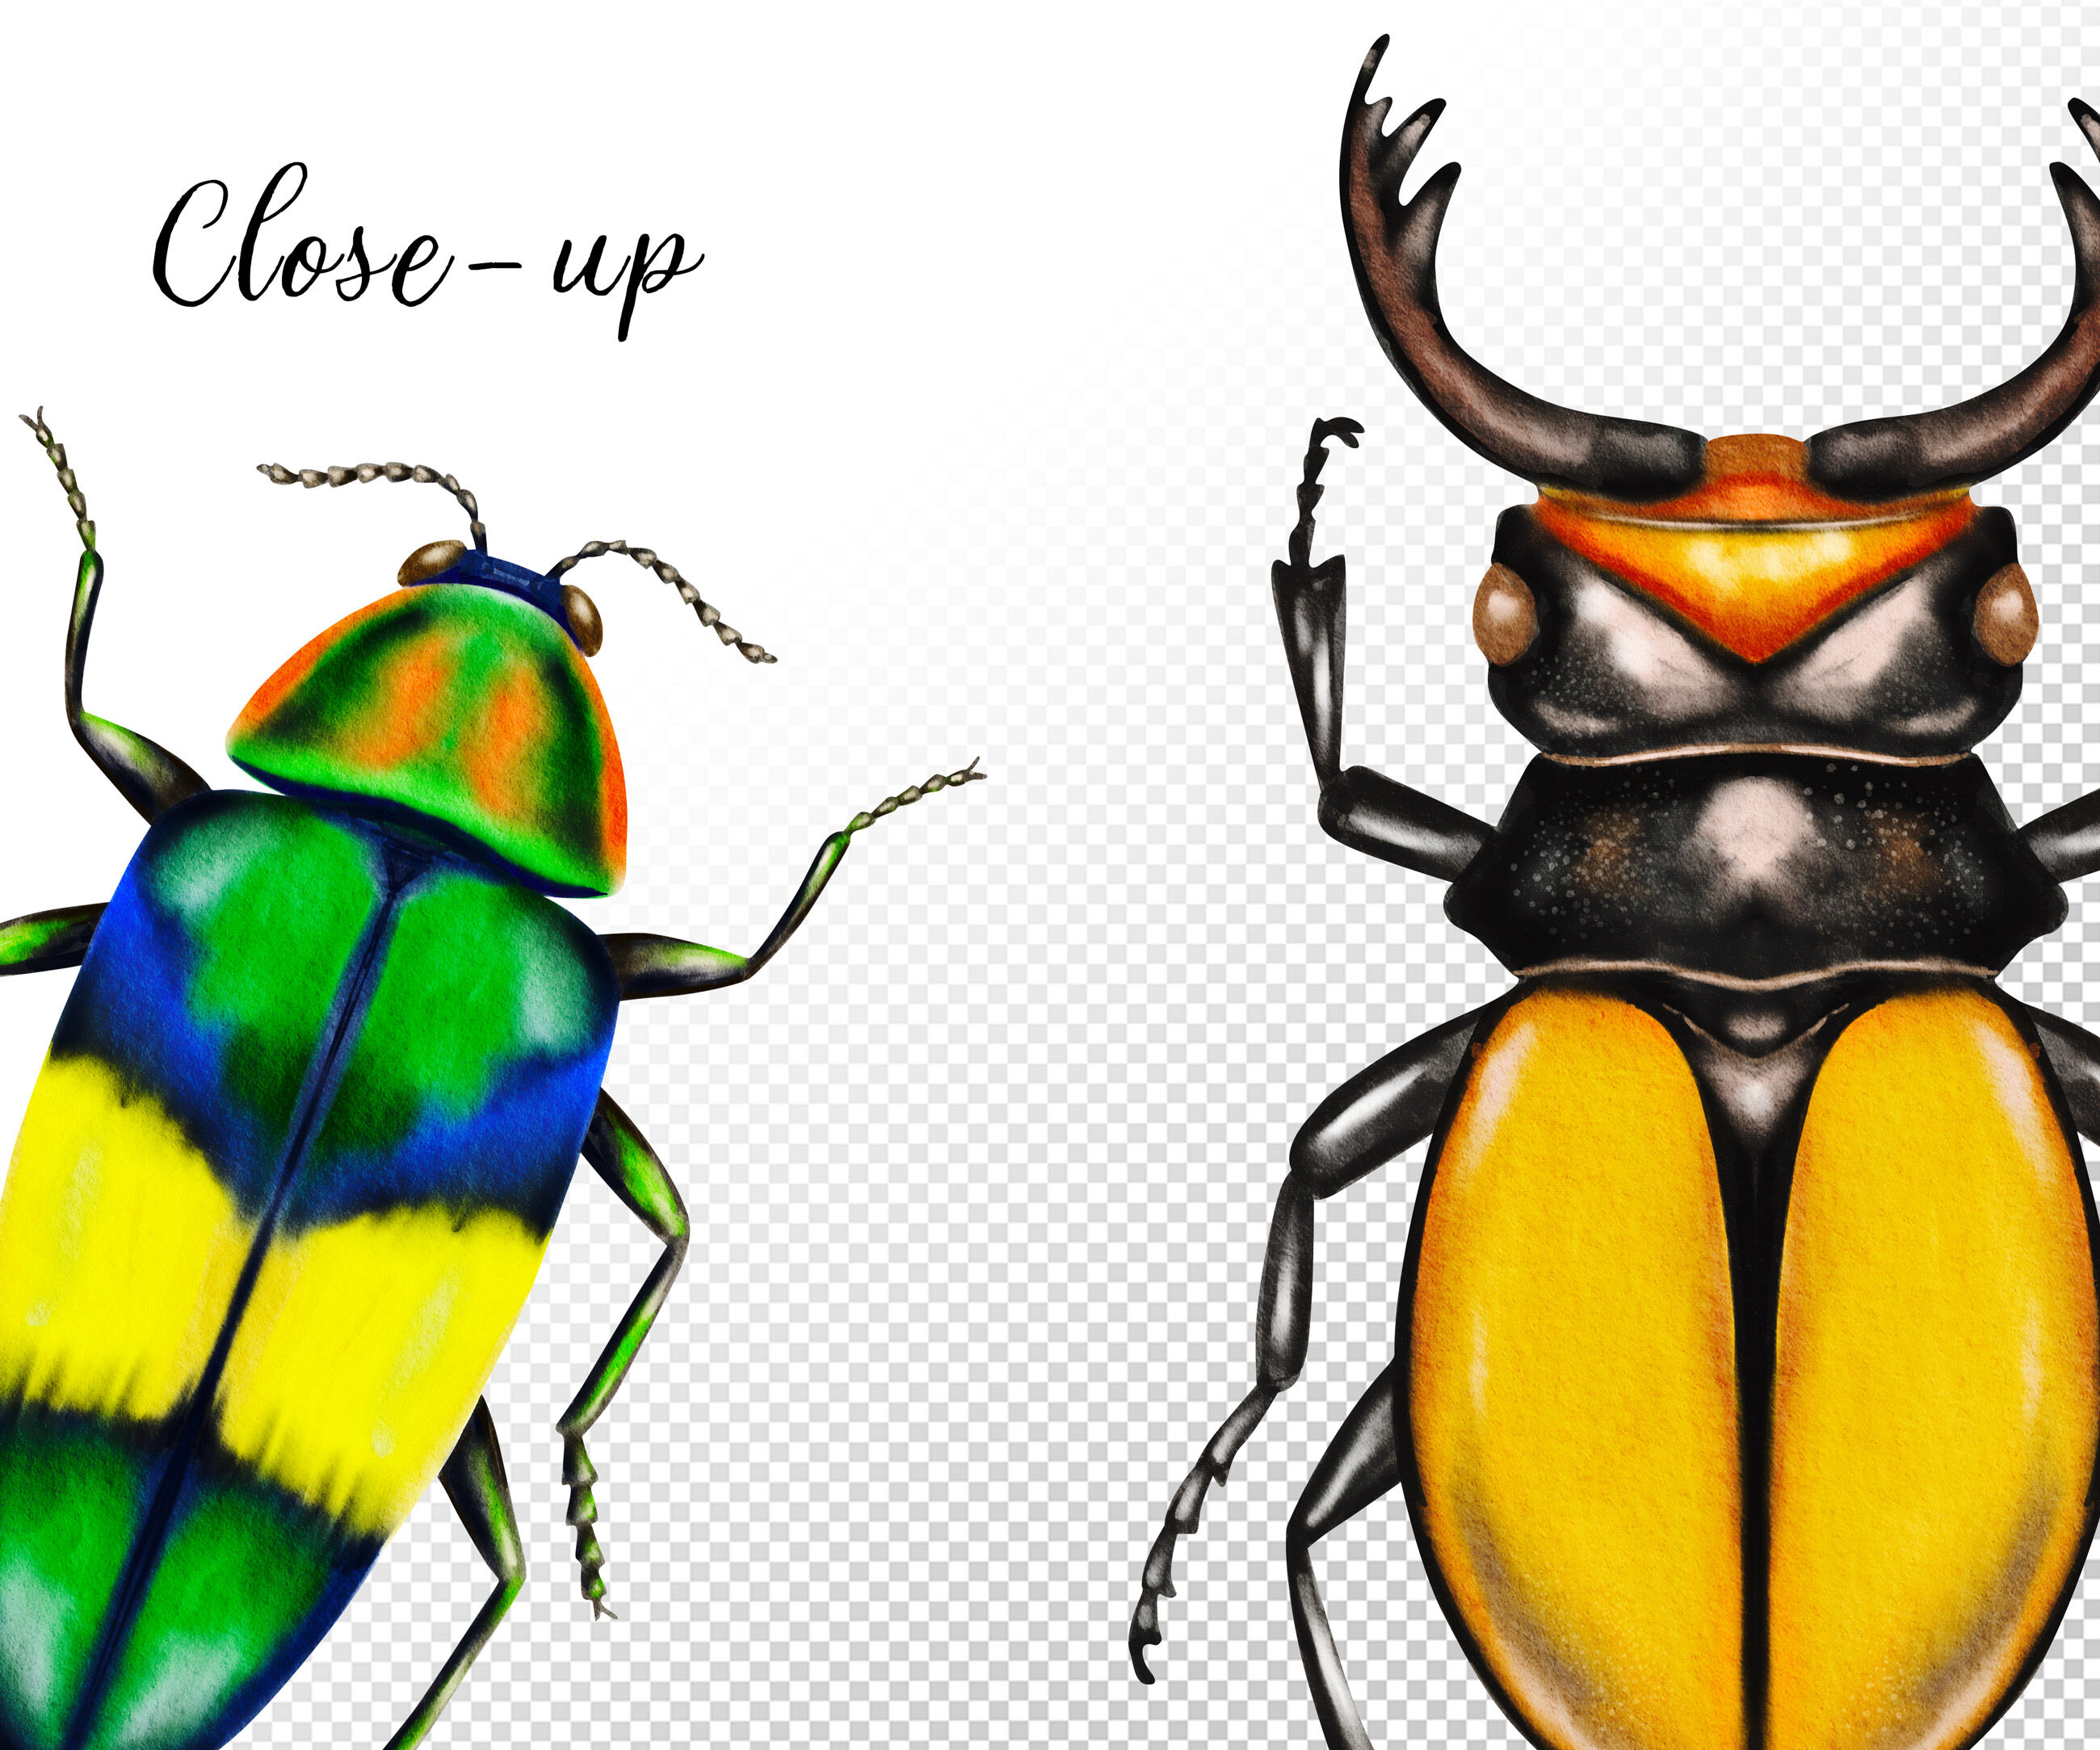 Watercolor Beetles Clipart, Bug, Insects, Bug Catching, Beetles PNG By  Svetlana Sintcova